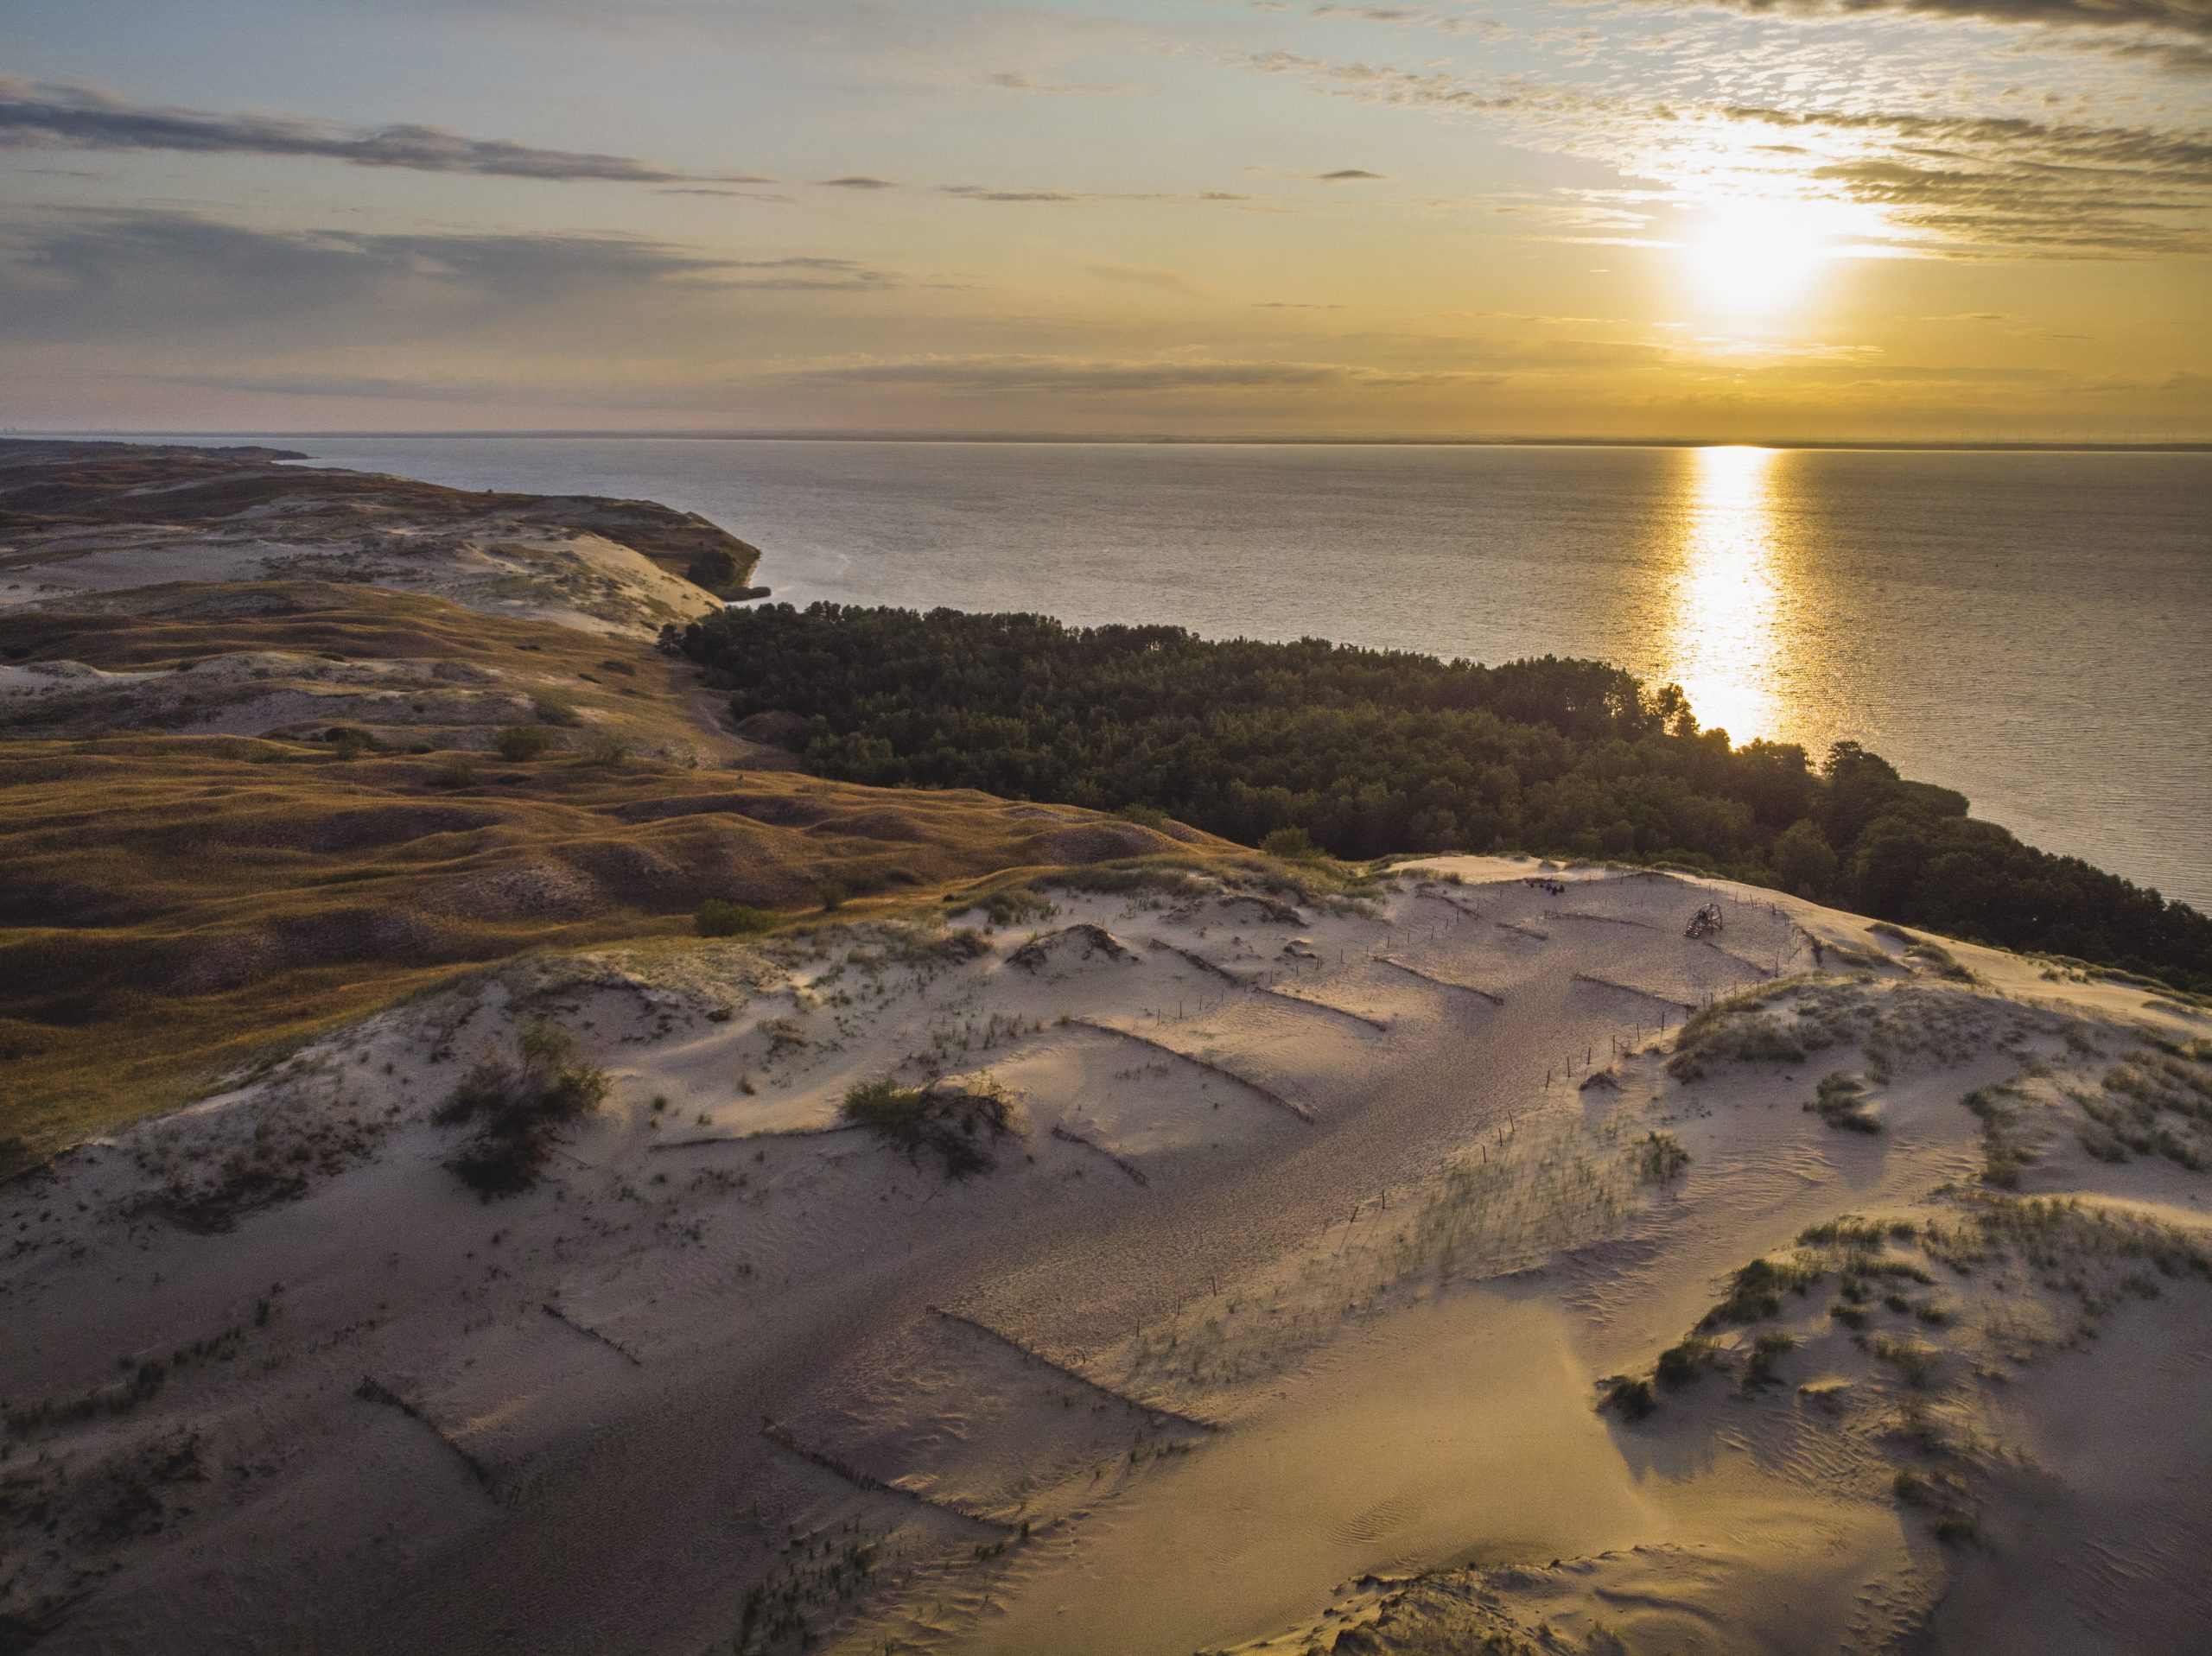 Sand dunes facing the sea with a sunset